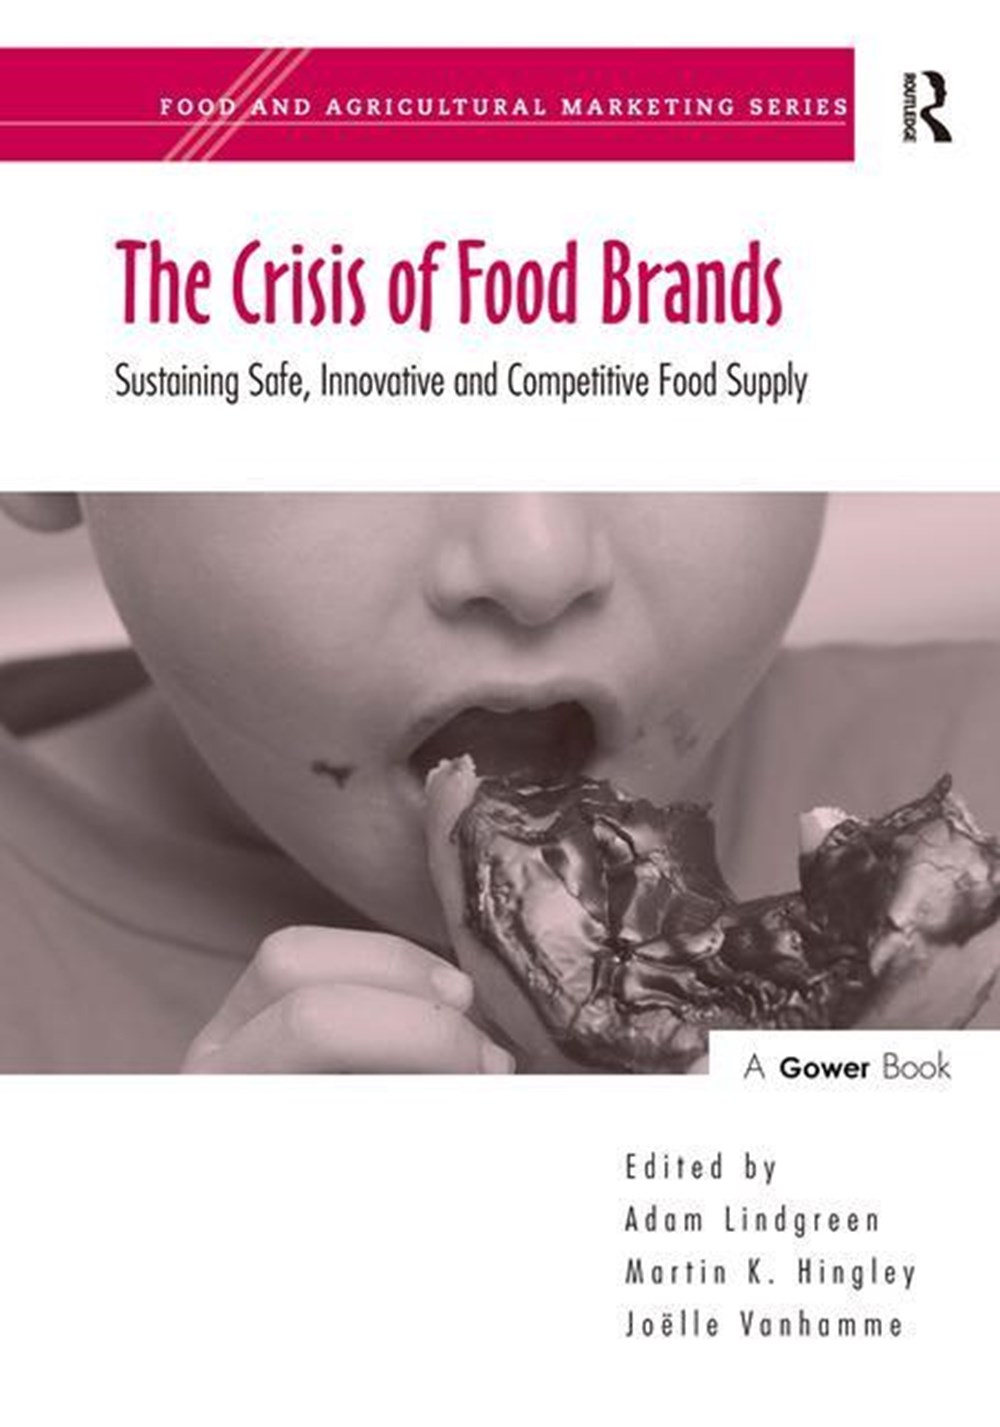 Crisis of Food Brands: Sustaining Safe, Innovative and Competitive Food Supply